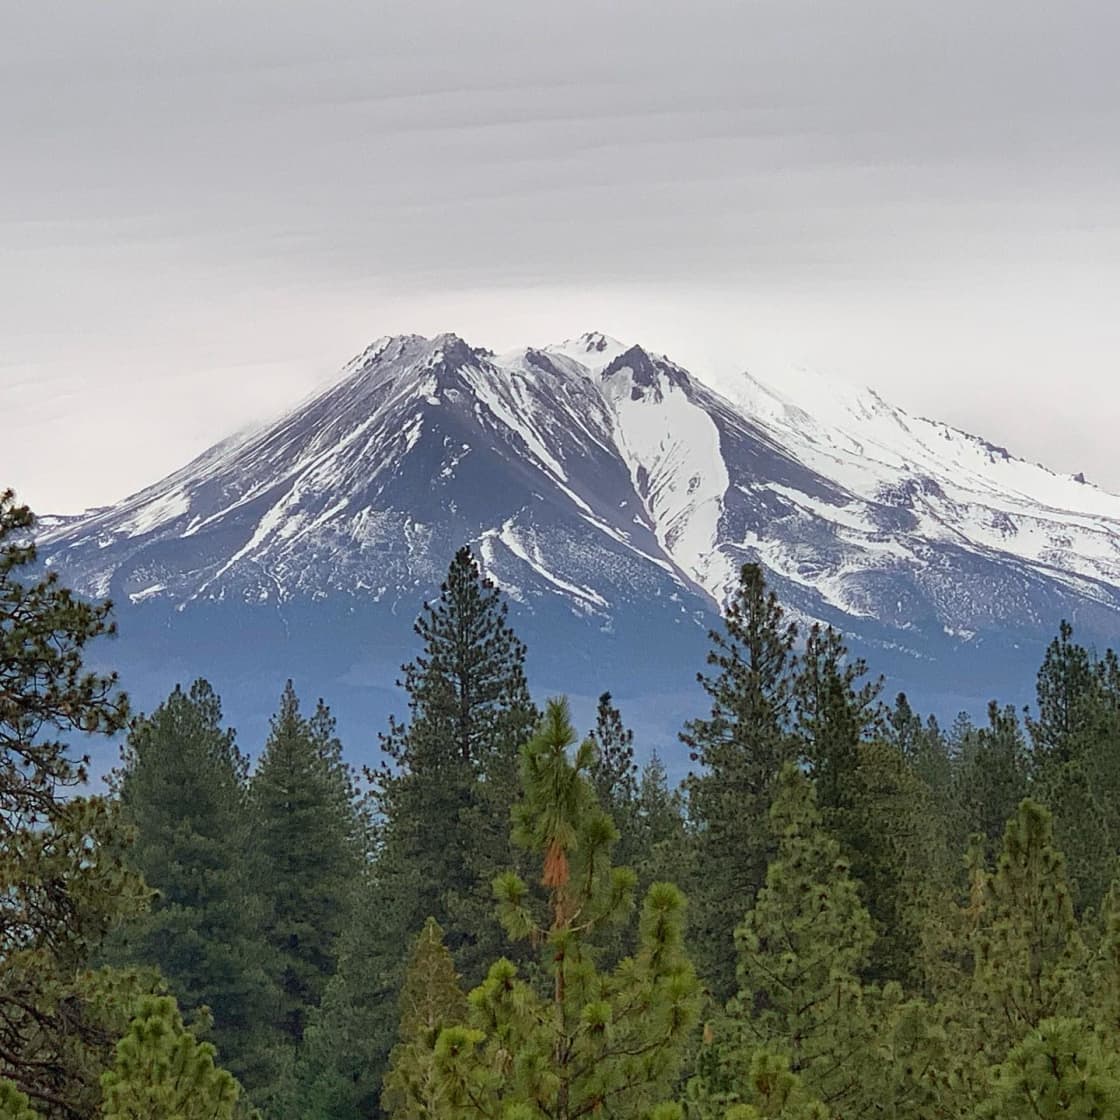 Spectacular views of Mt Shasta from the property!